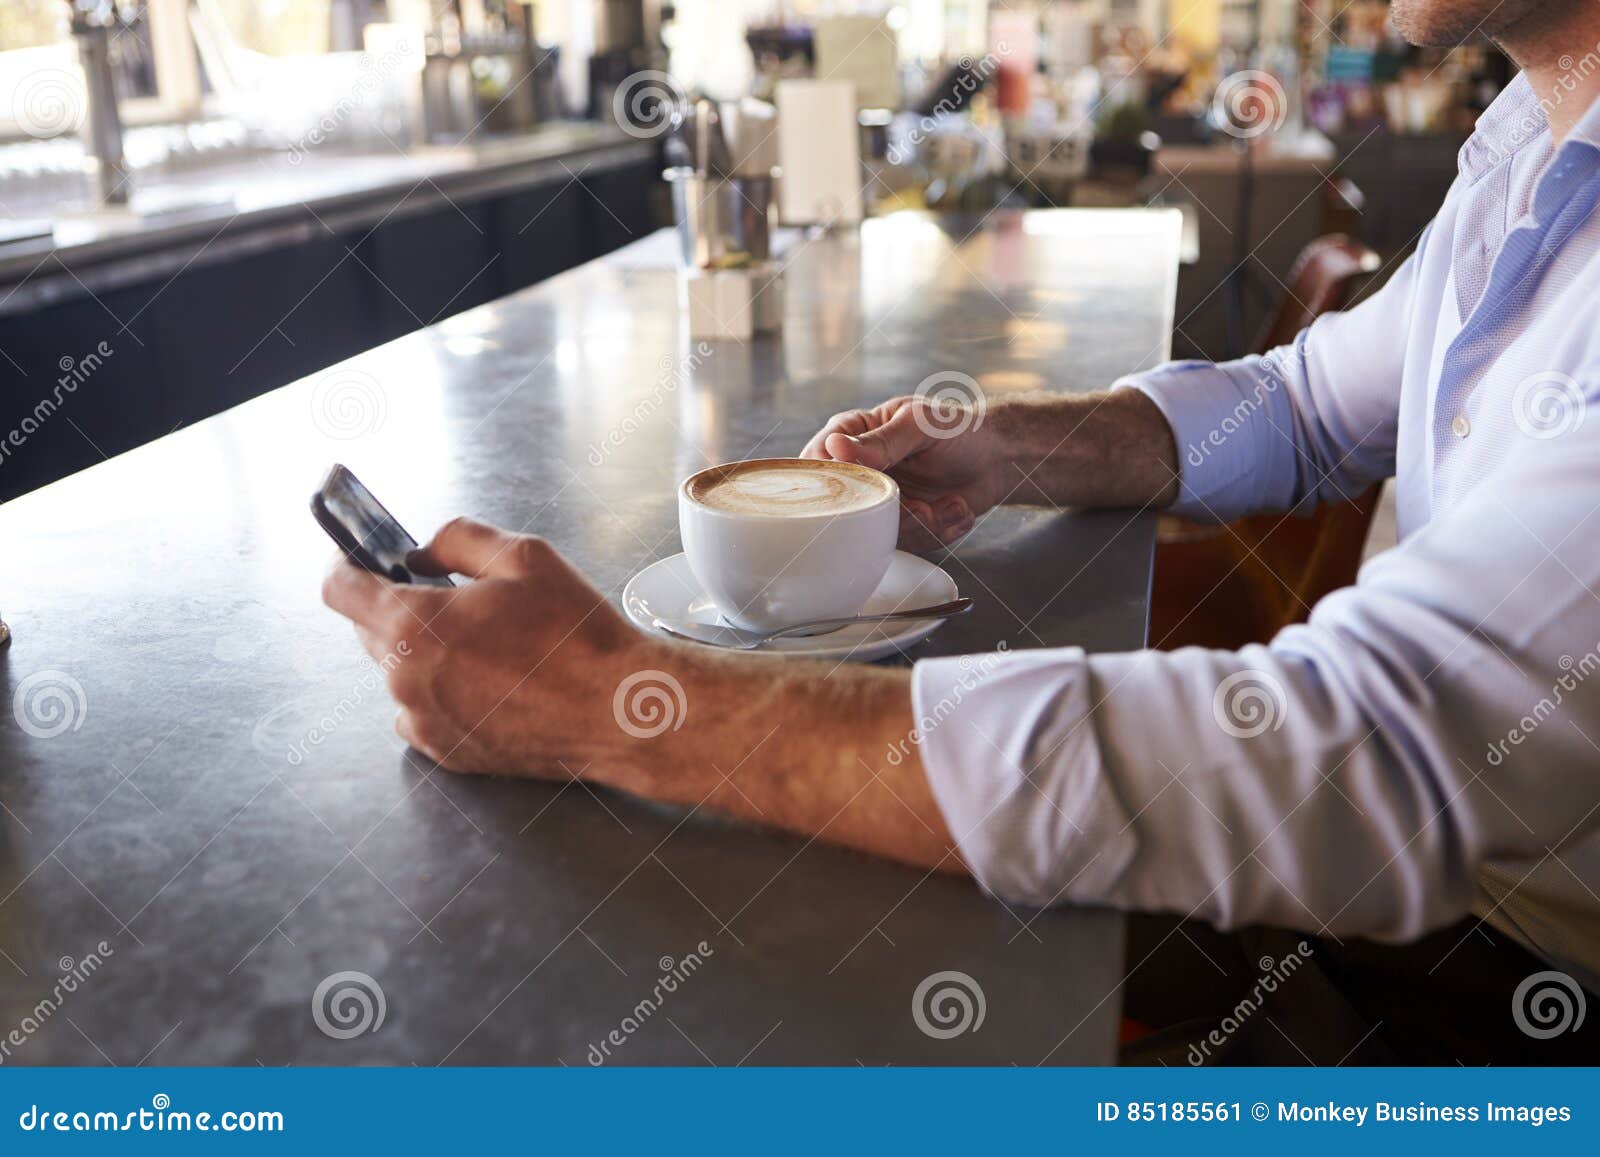 close up of man checking messages on phone in coffee shop